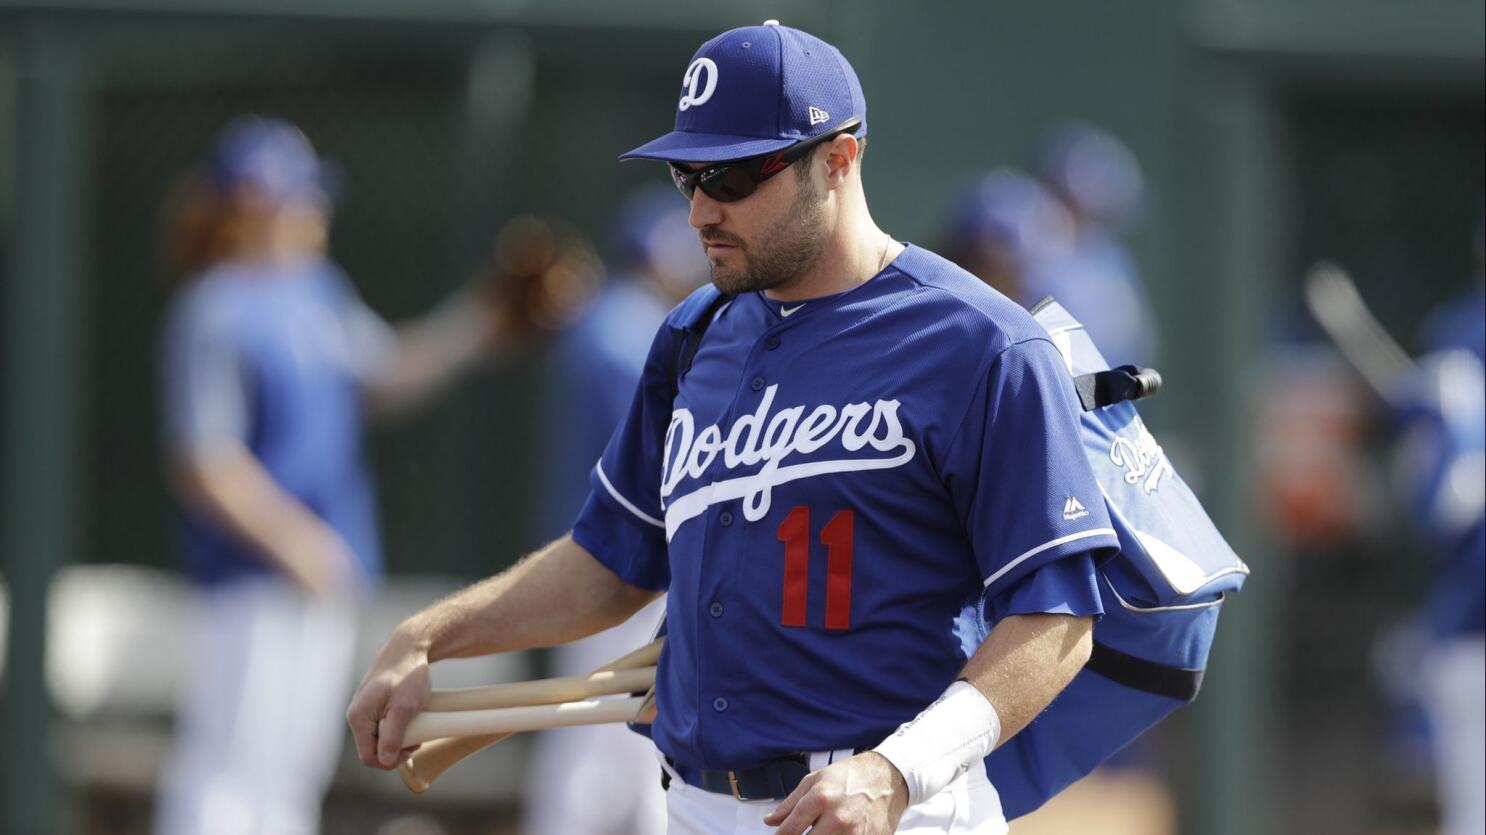 Dodgers must do without outfielder AJ Pollock for at least 2 weeks